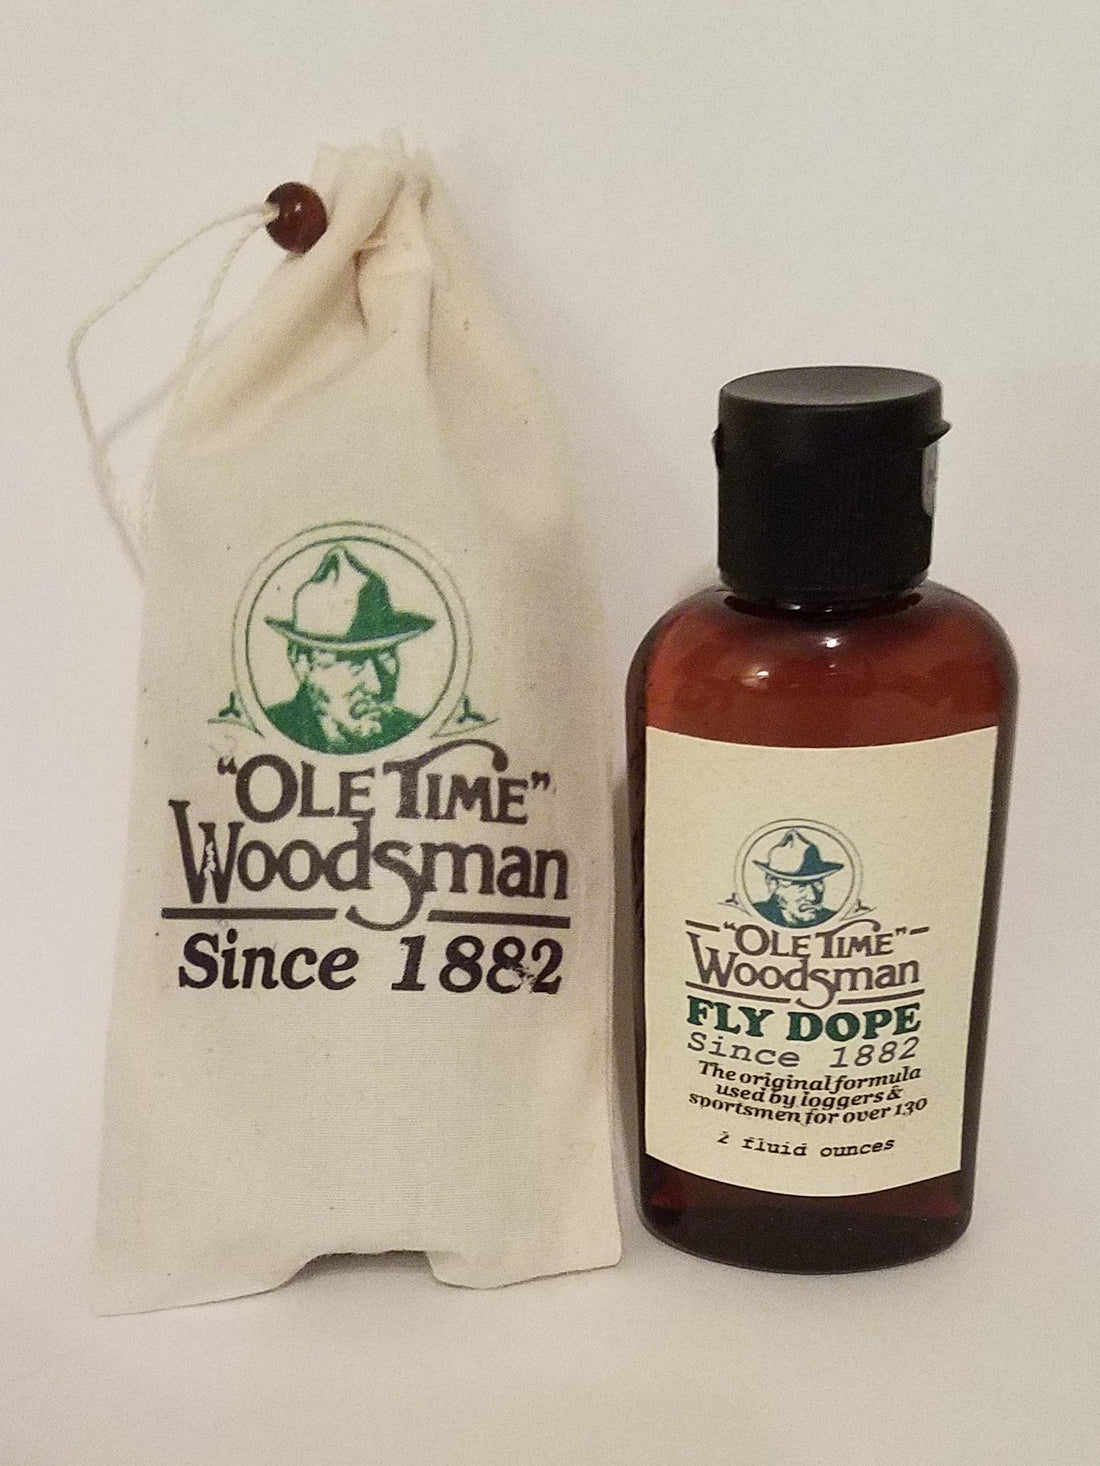 FINALLY SCIENCE IS CATCHING UP TO OLE TIME WOODSMAN FLY DOPE SINCE 1882